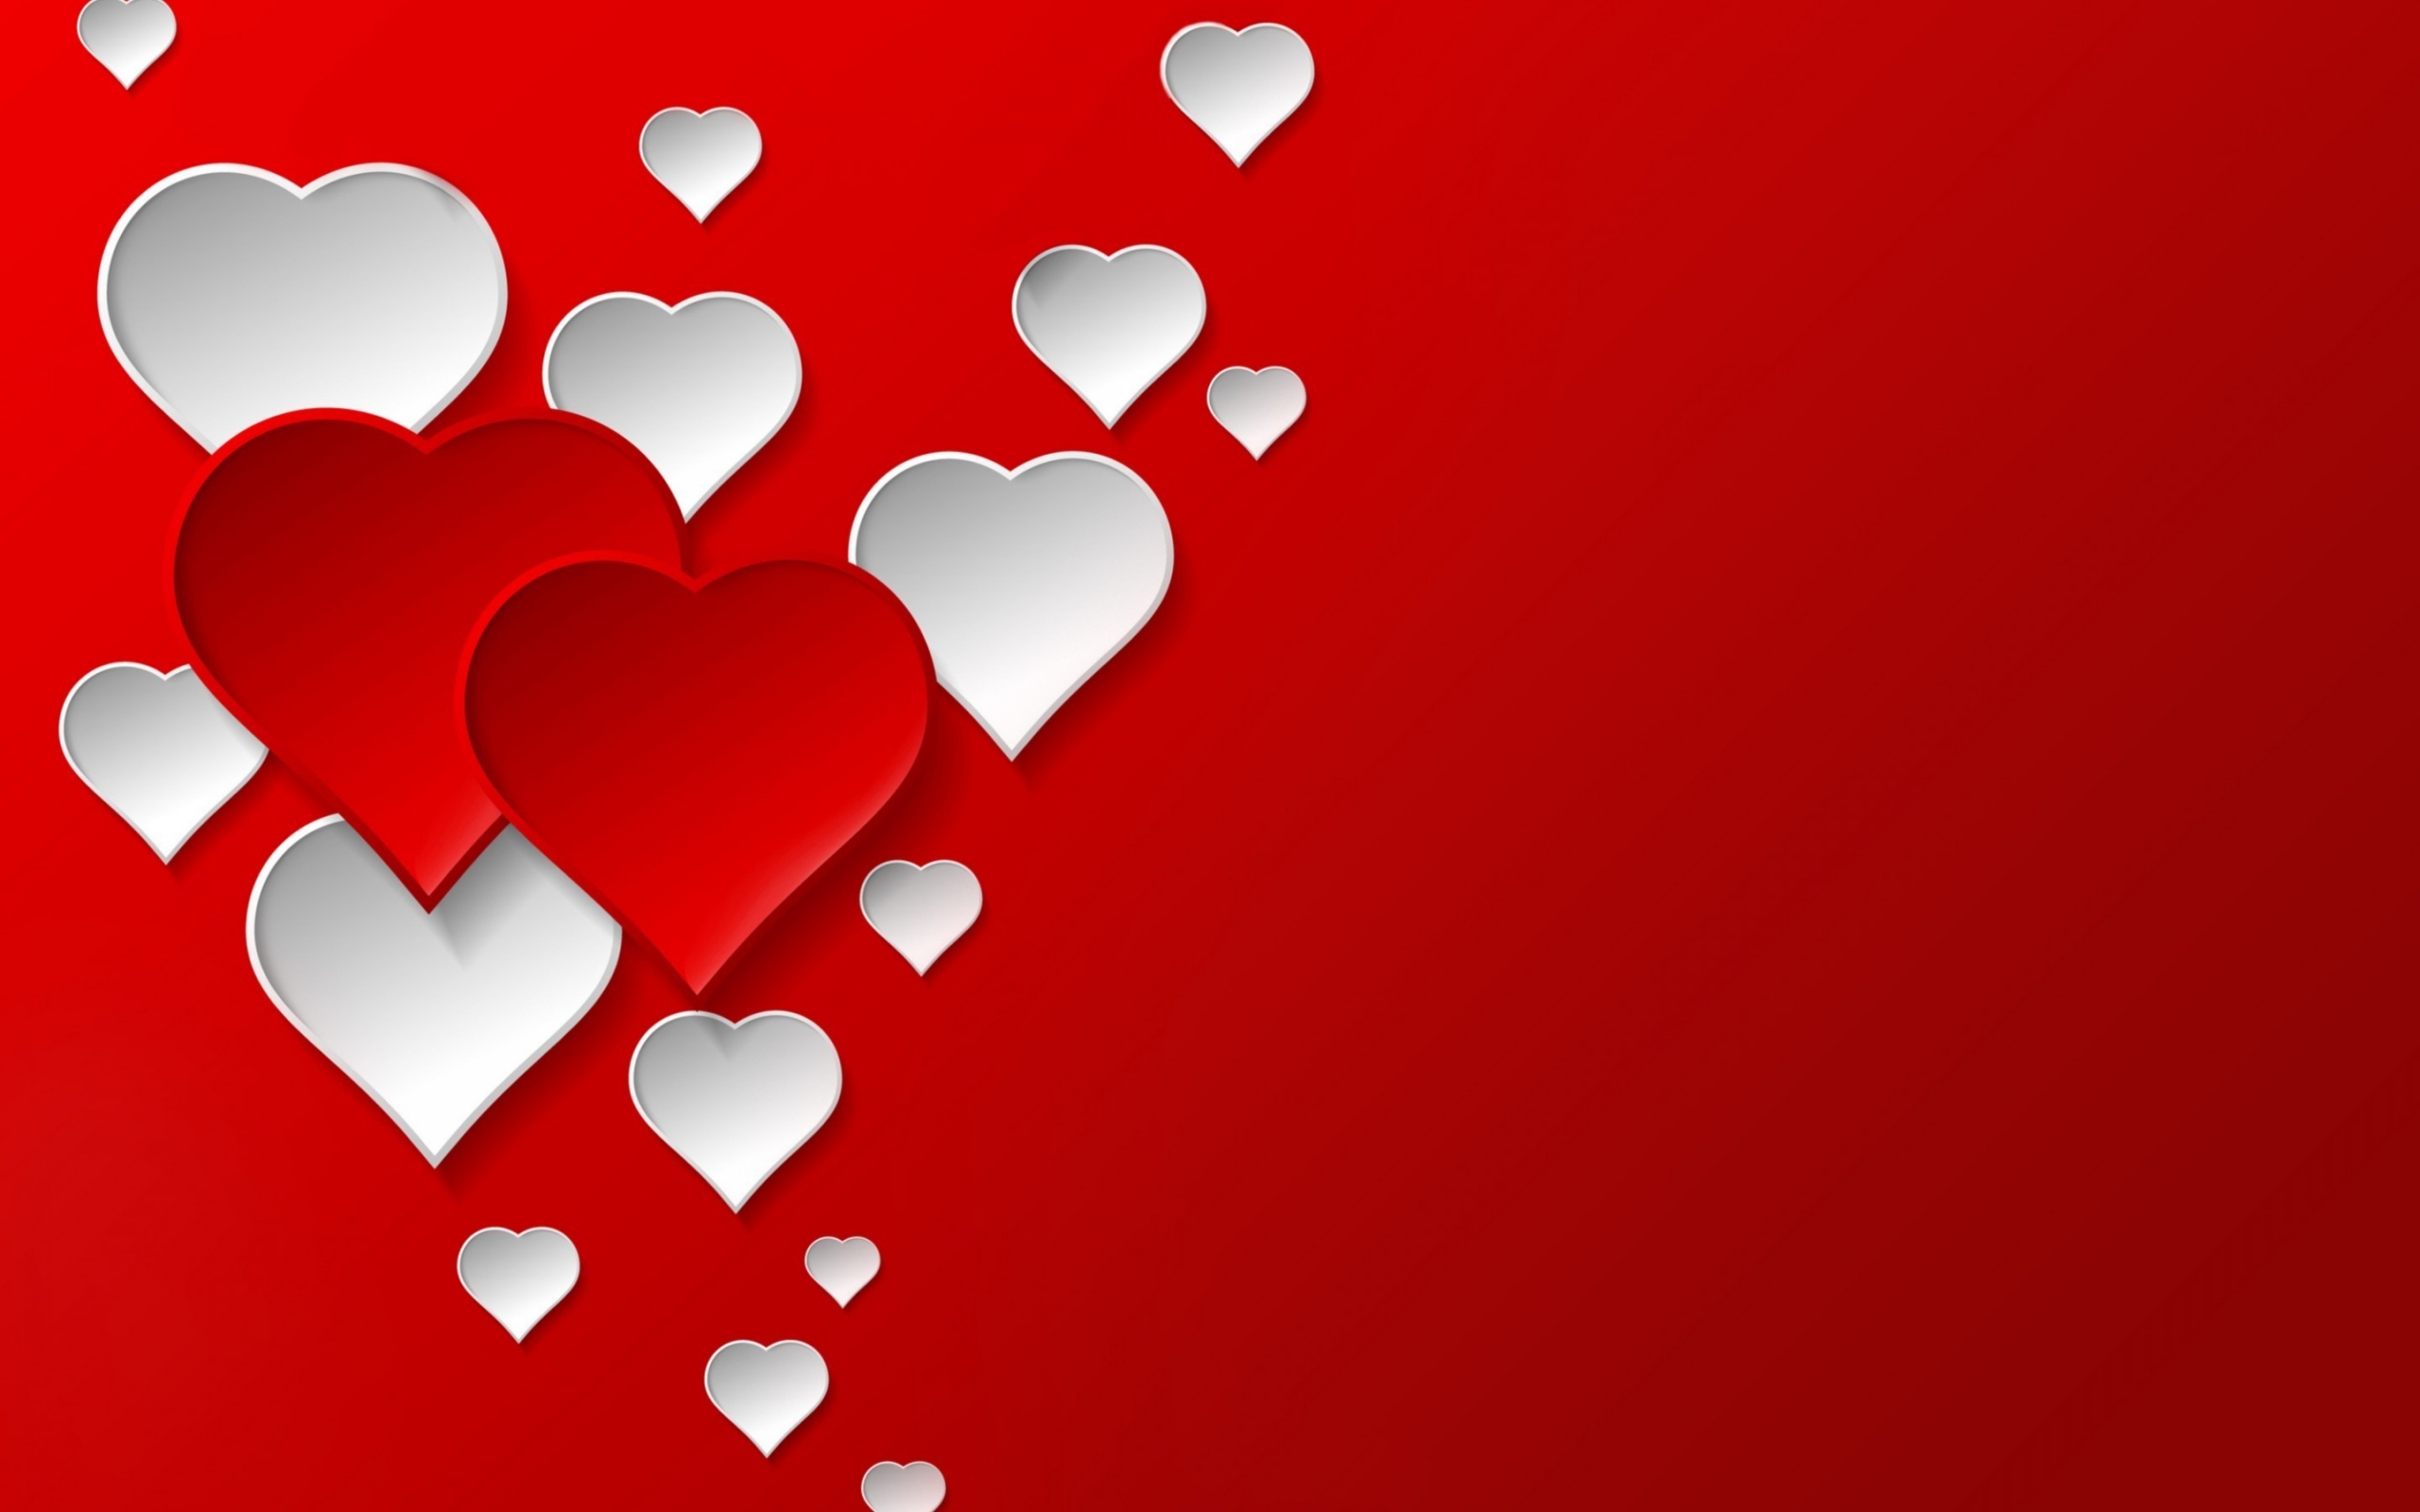 Digital Hearts for 2560 x 1600 widescreen resolution